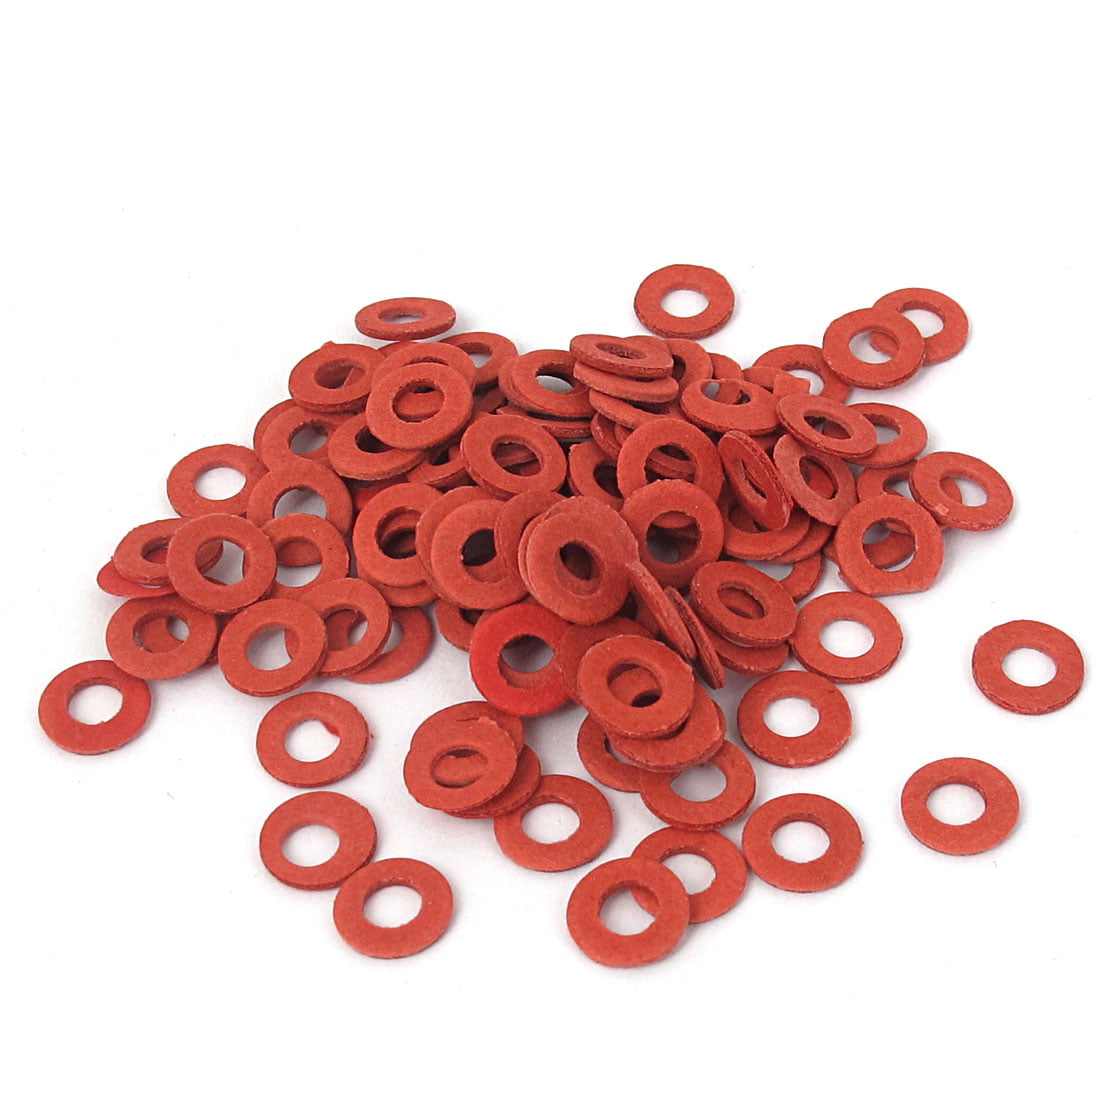 100 M3 10mm Insulating Fiber Washers Insulating Washers Spacer Red Paper Washer 